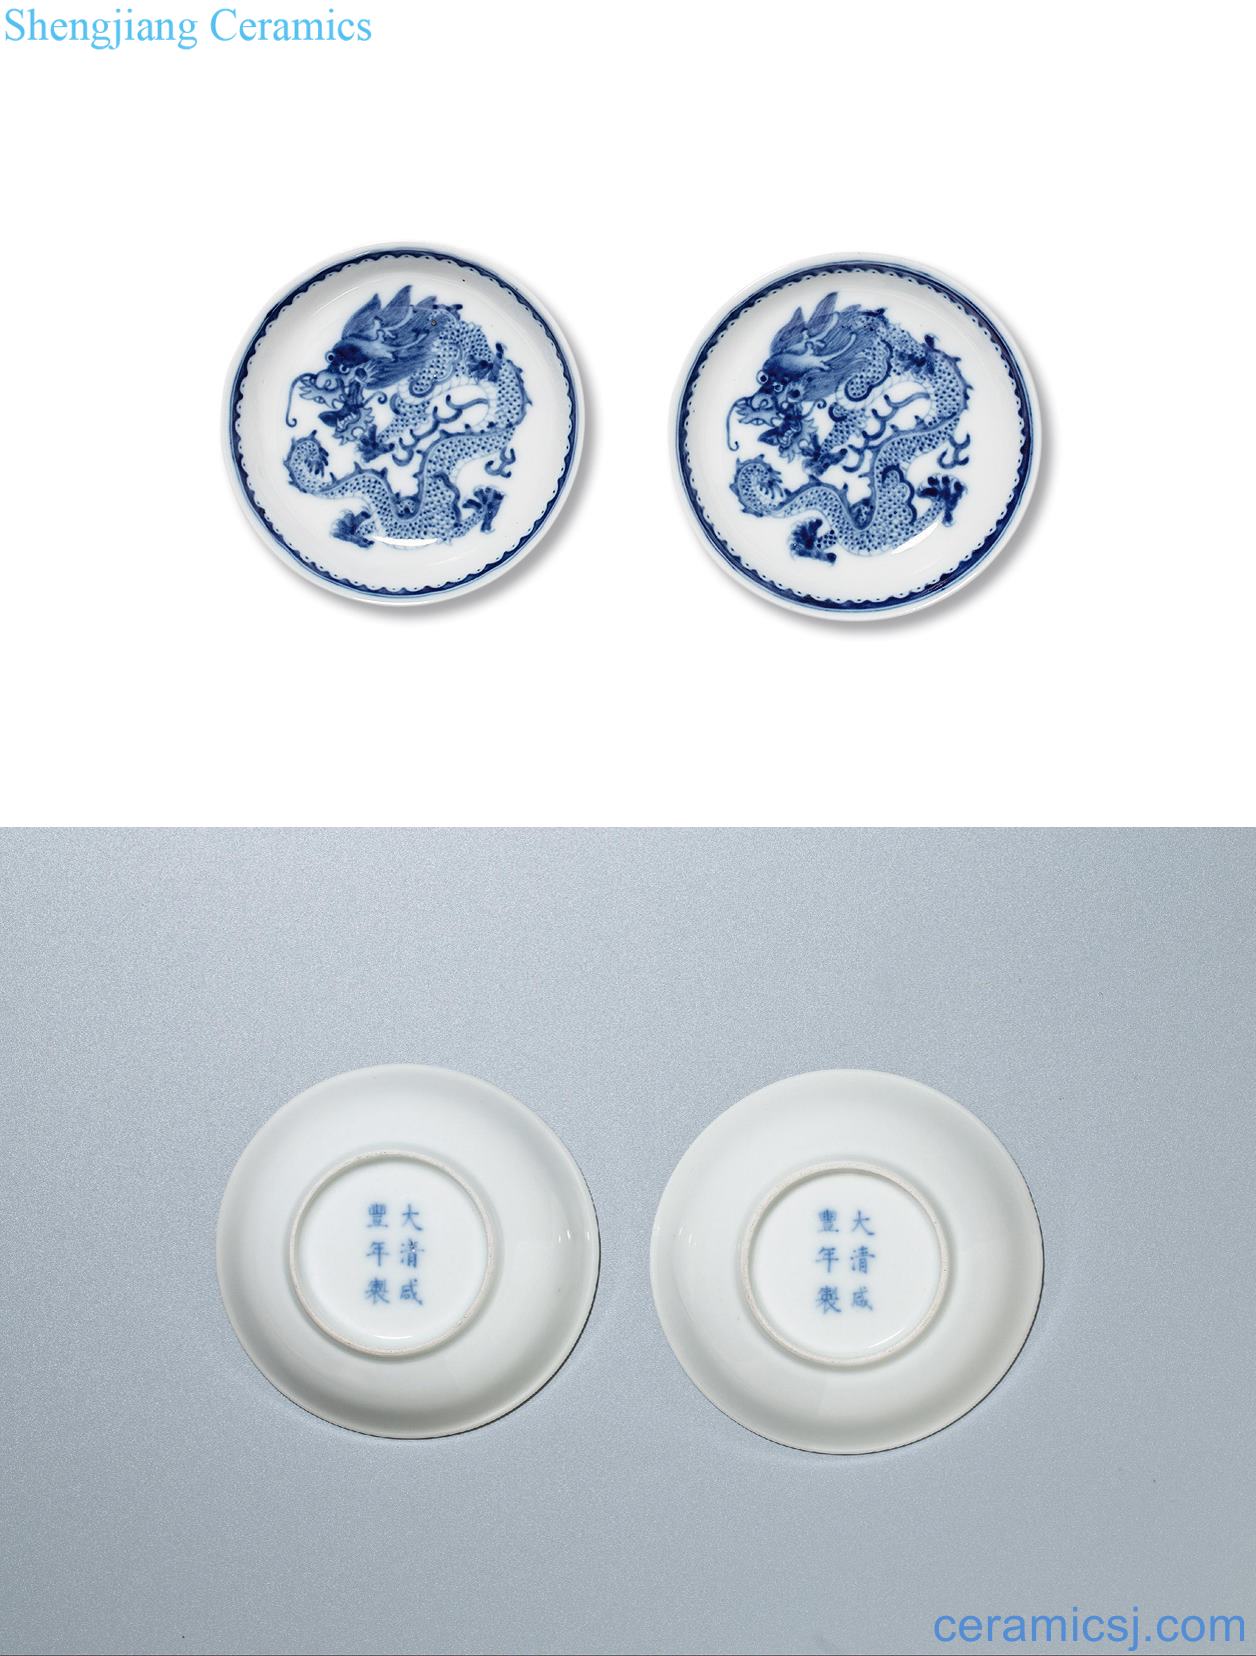 Qing xianfeng Blue and white dragon plate (a)